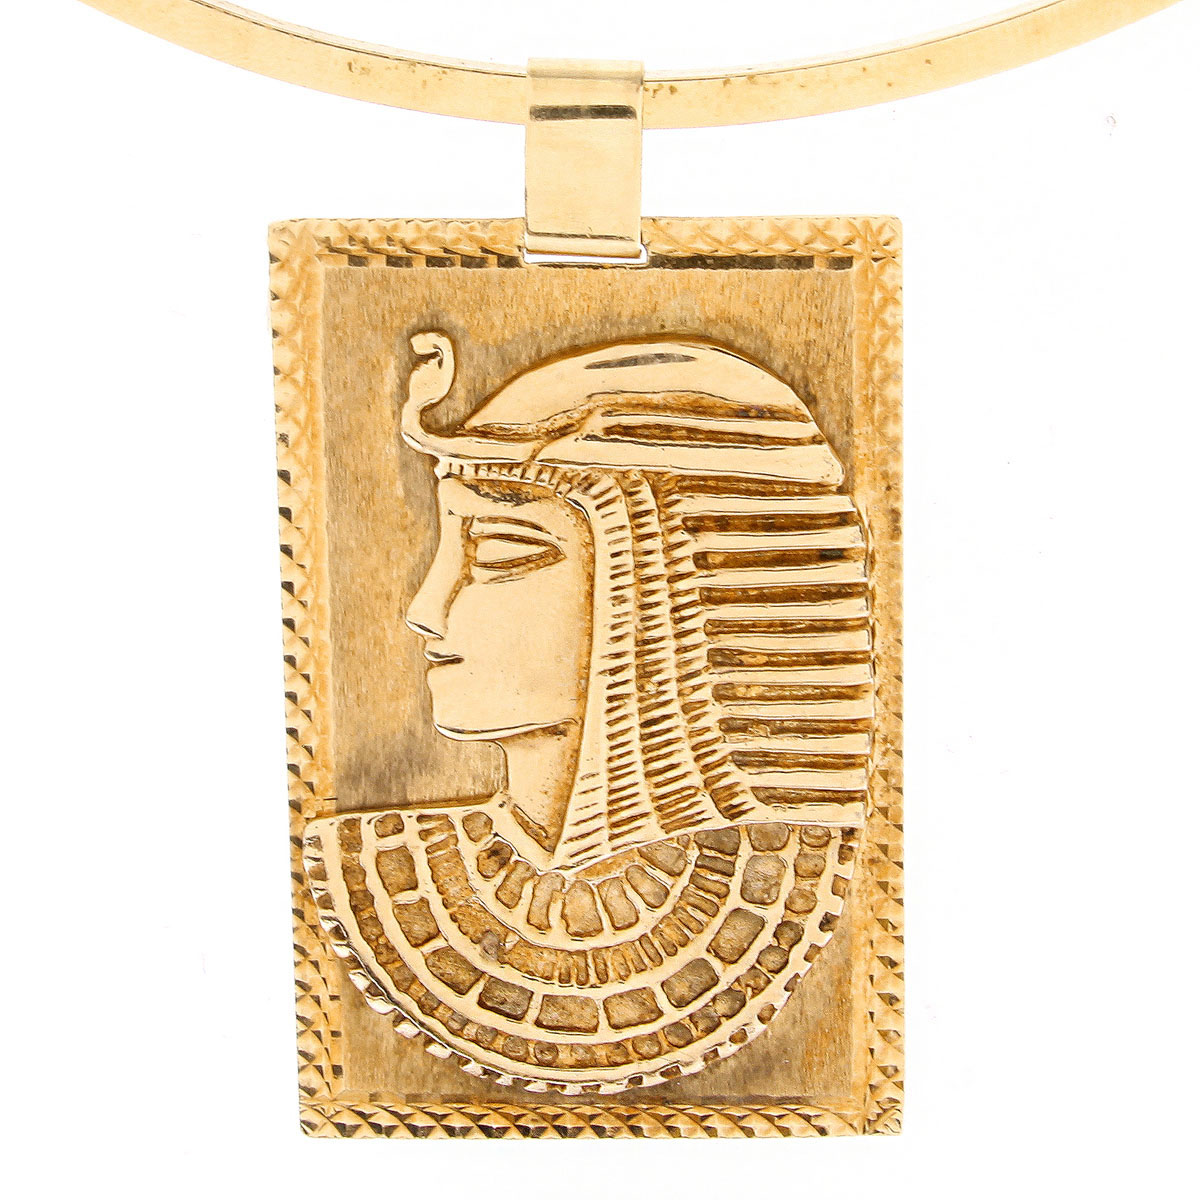 Vintage 14 Karat Yellow Gold "Cleopatra" Pendant Necklace. Stamped (rubbed) 14K.